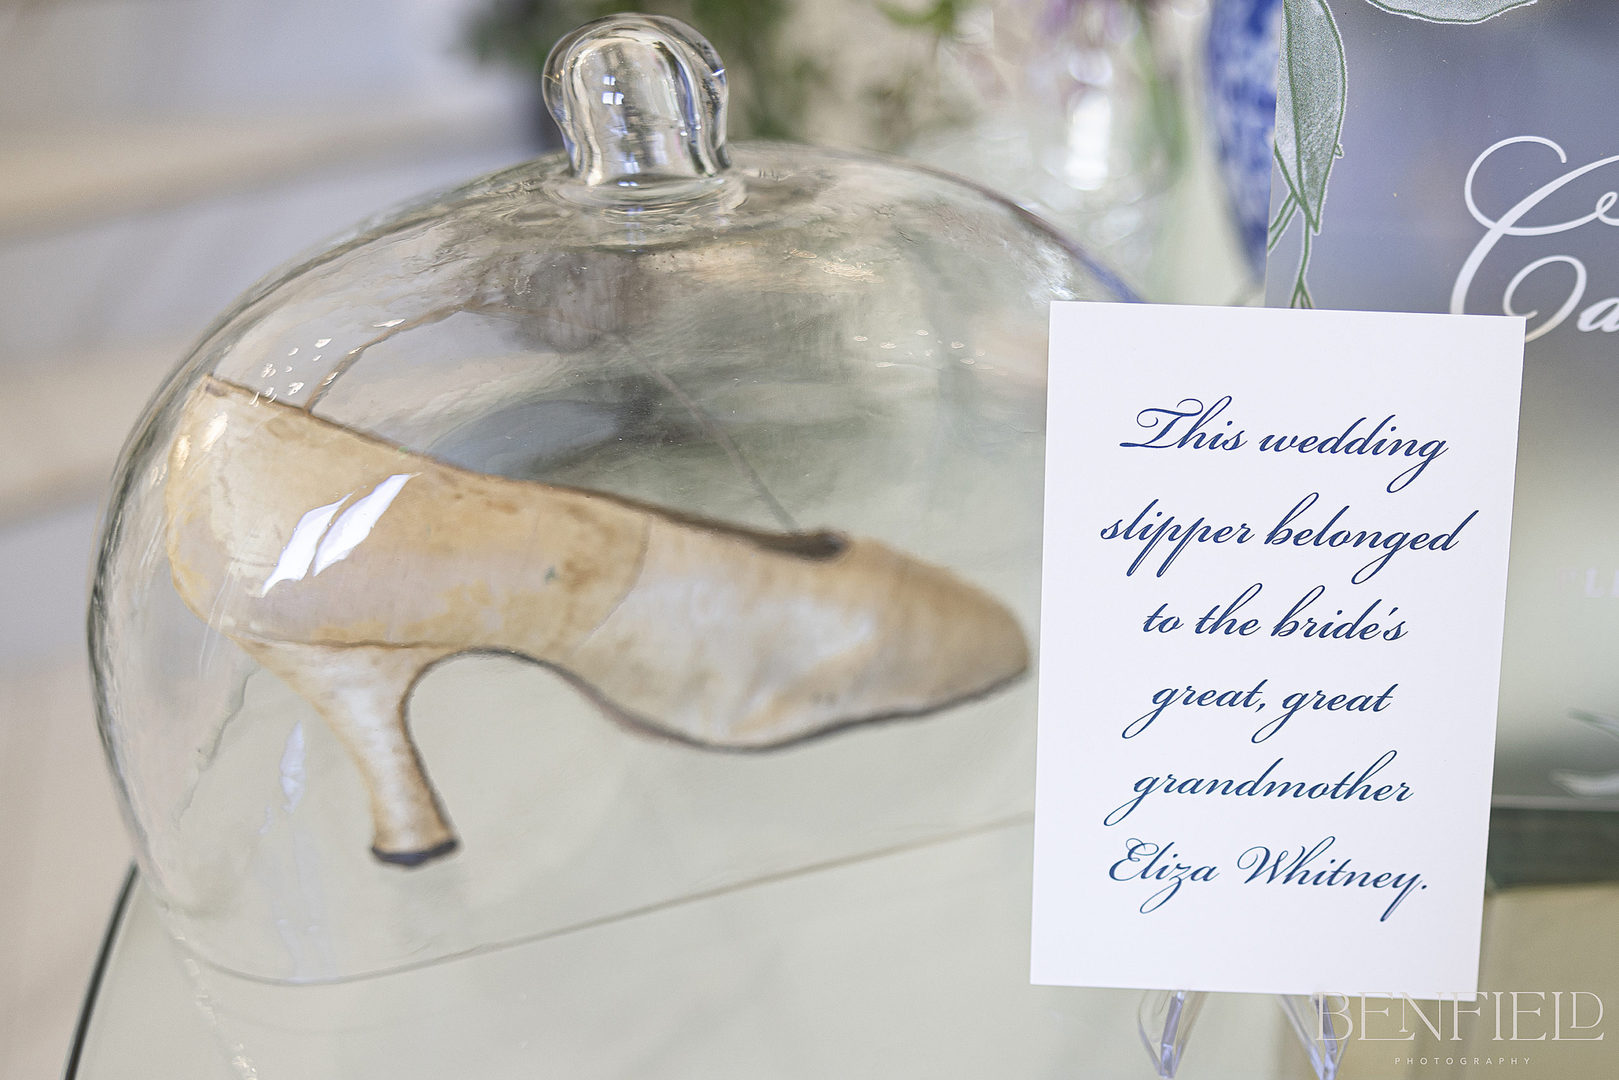 antique wedding shoes on display at the entrance of this luxury wedding at hillside estate near Frisco Texas